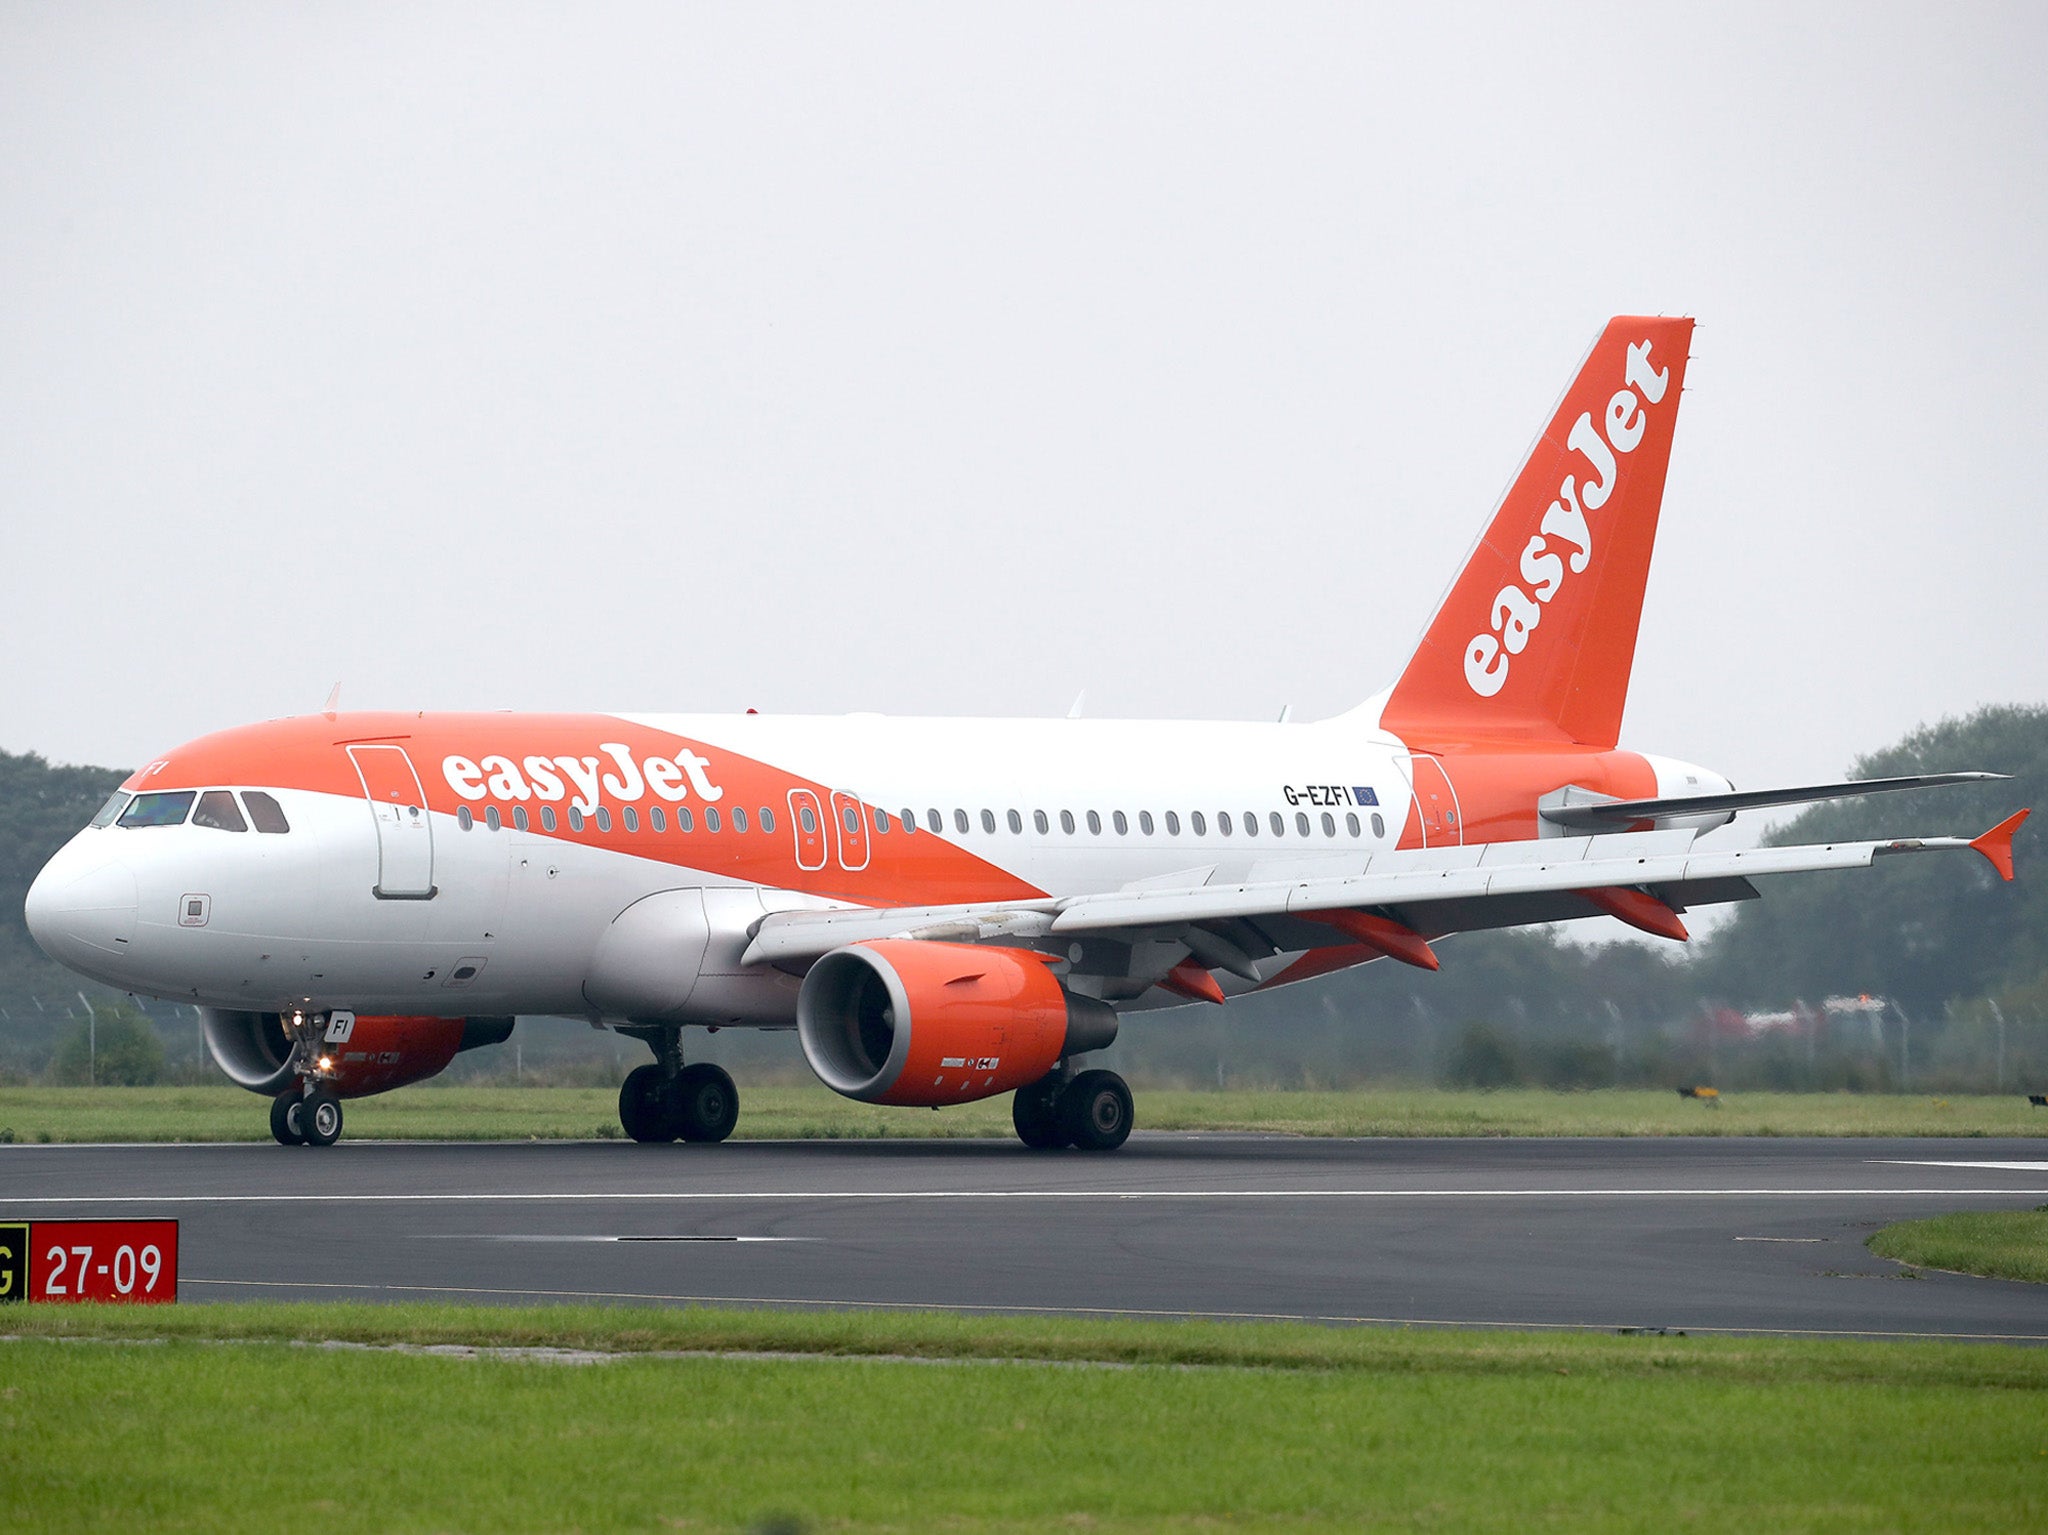 Easyjet bookings are 10 per cent down since the EU referendum